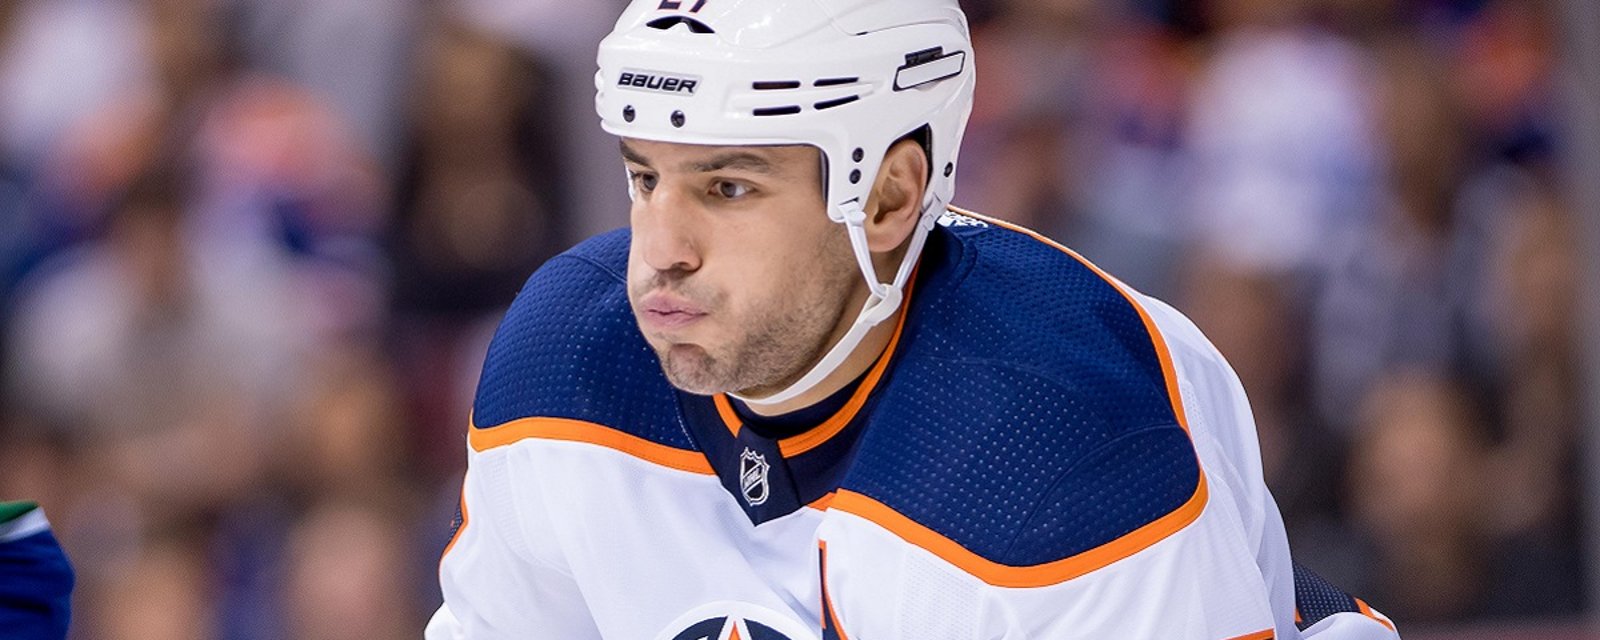 Rumor: The Boston Bruins may have missed out on Milan Lucic.